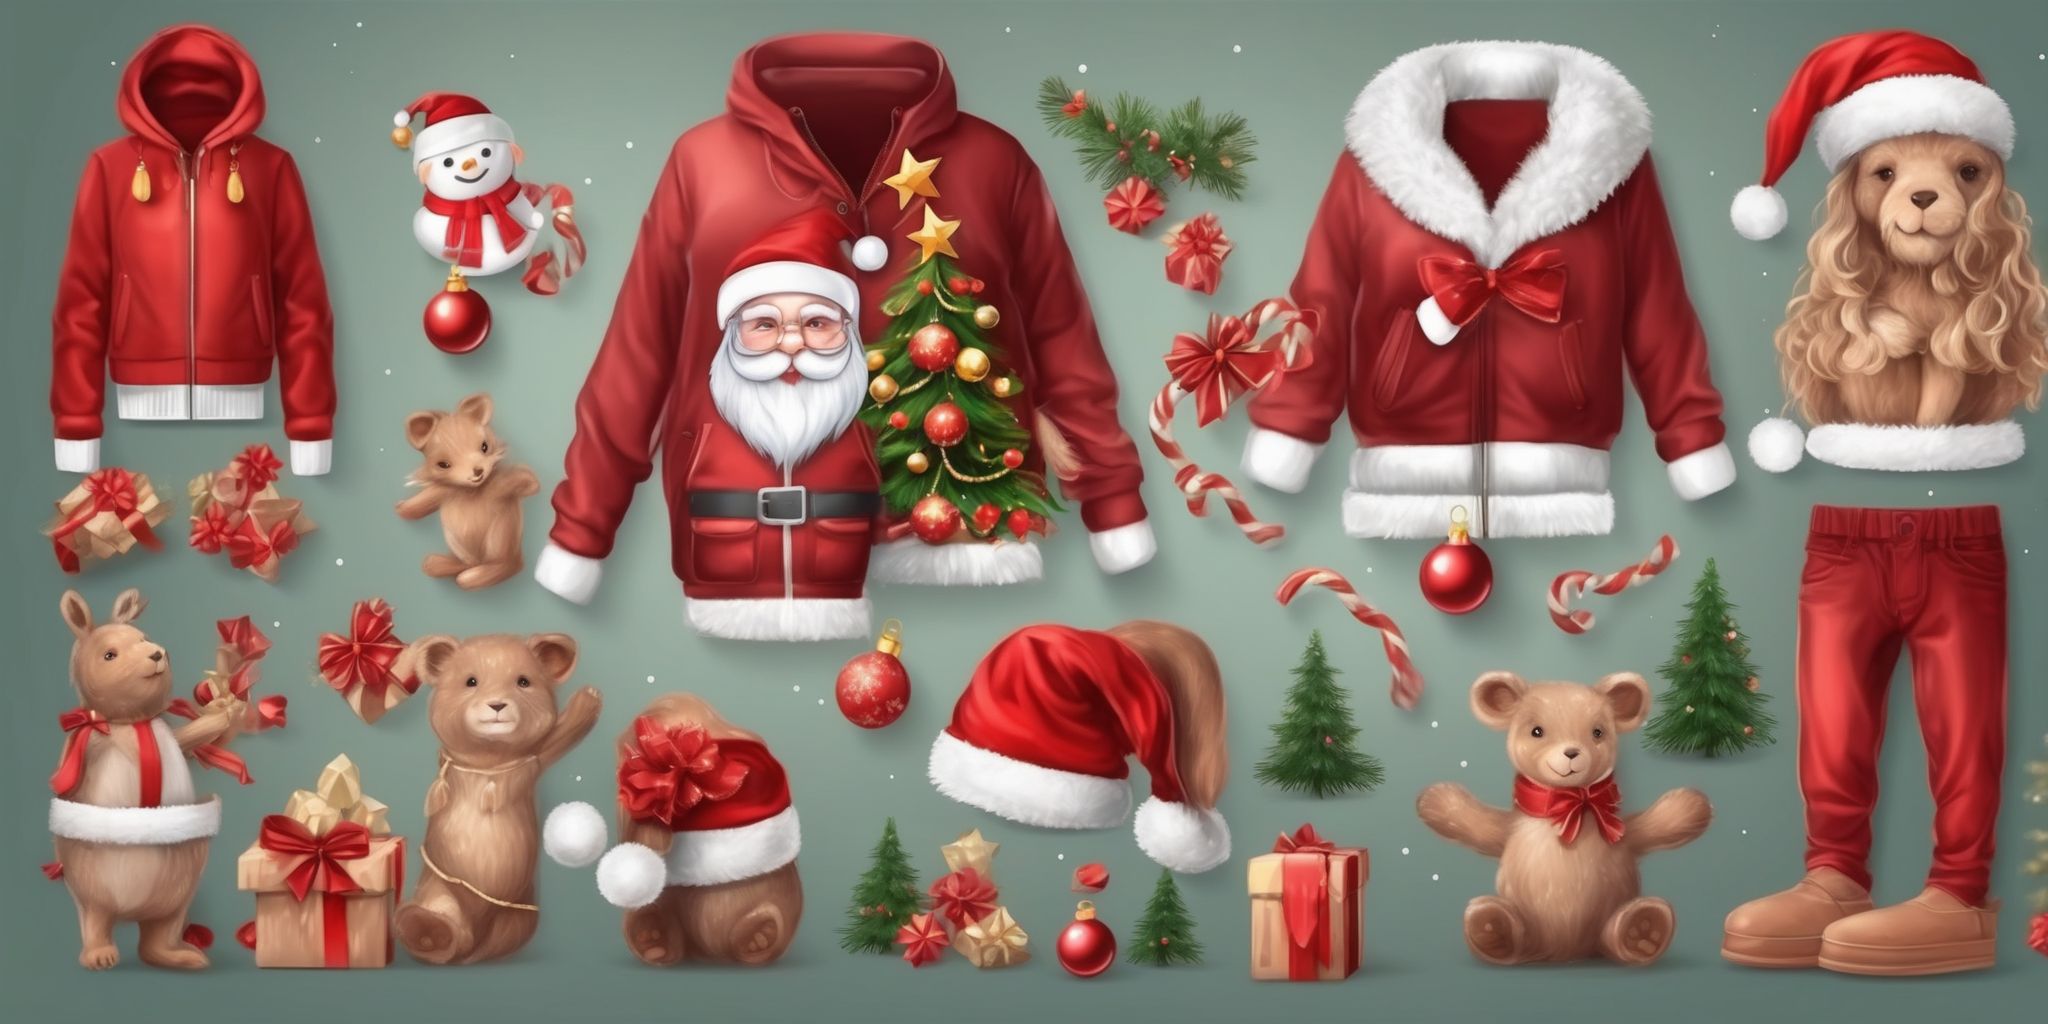 Outfit in realistic Christmas style